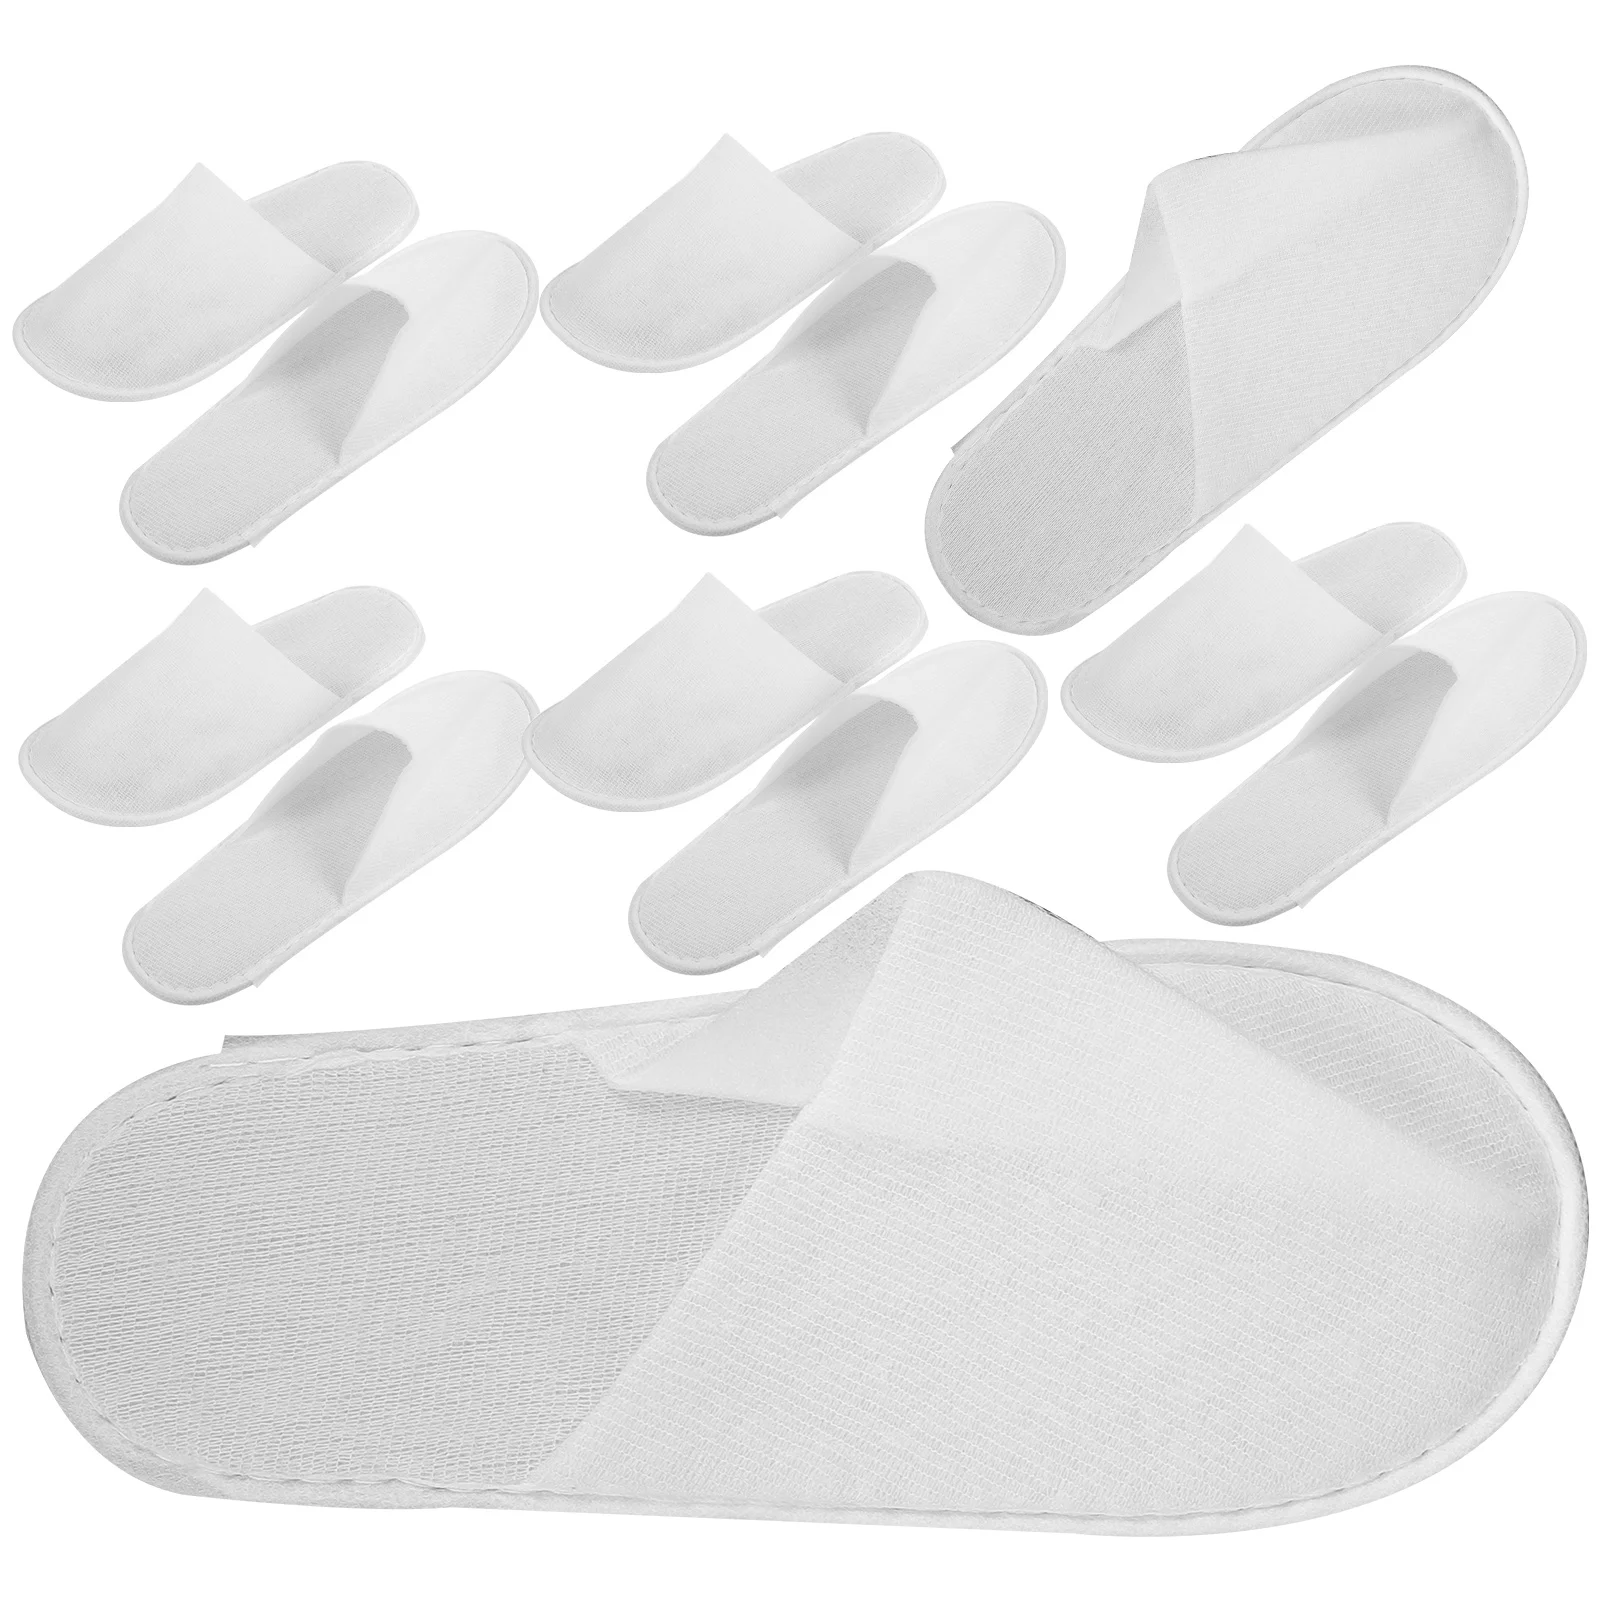 

12 Pairs Of Guest Spa Disposable House Slippers For Guest Disposable House Slippers Hotel Slippers Bulk for Guest Home Travel